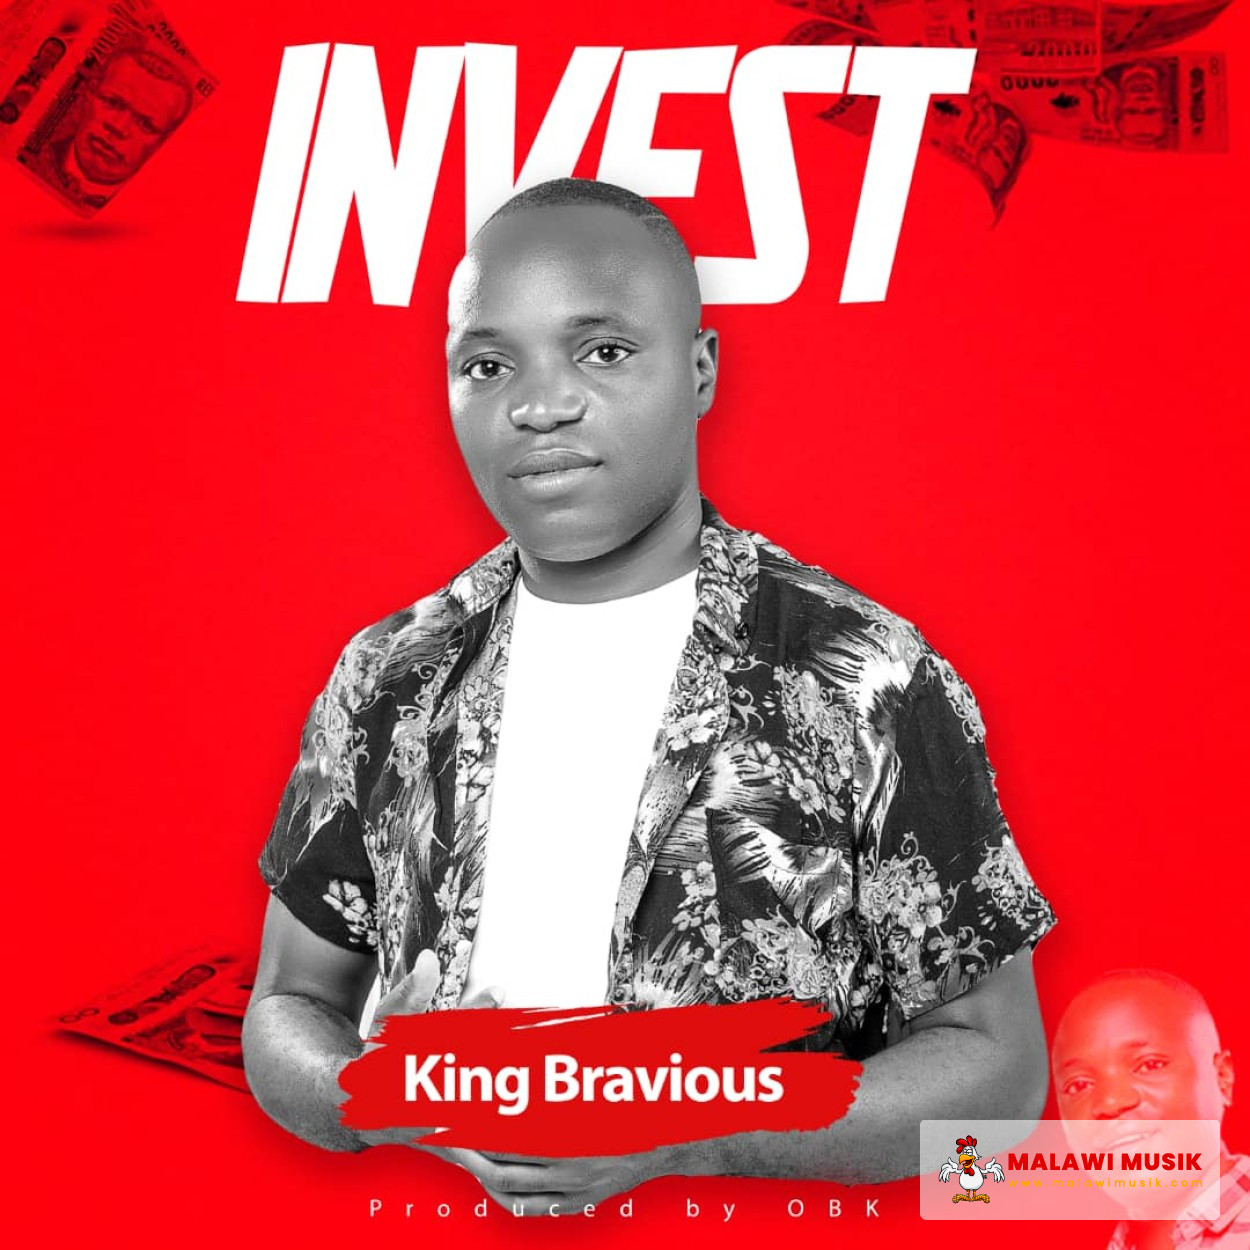 King Bravious-King Bravious - Invest (rod by OBK BEATS)-song artwork cover